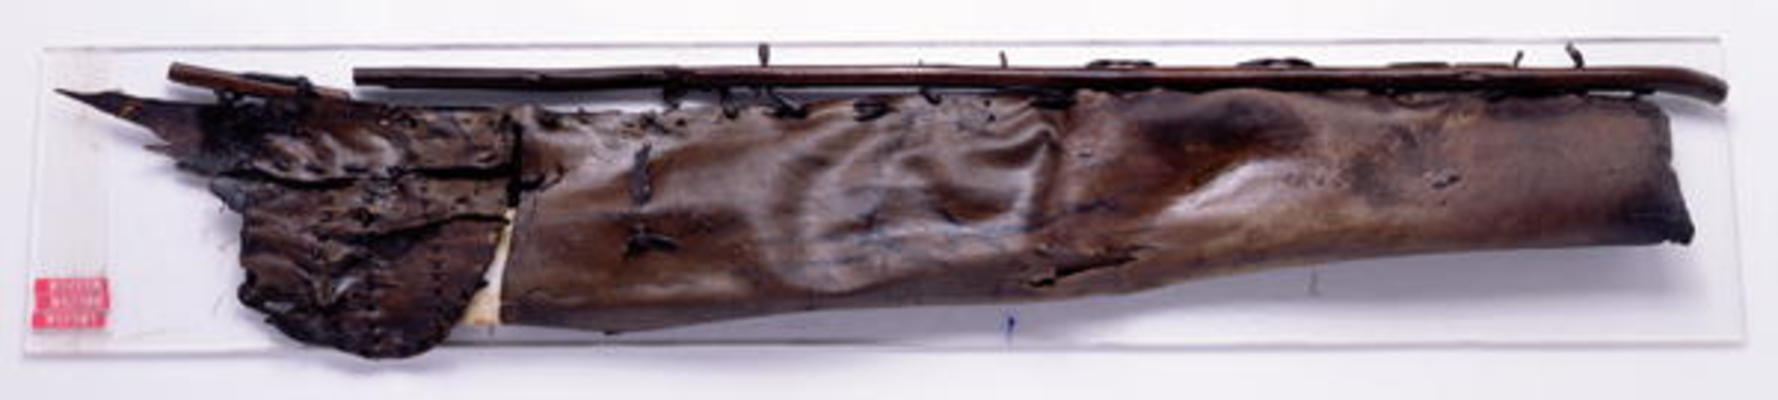 Quiver found with the Oetzi Iceman (chamois leather) de Copper Age